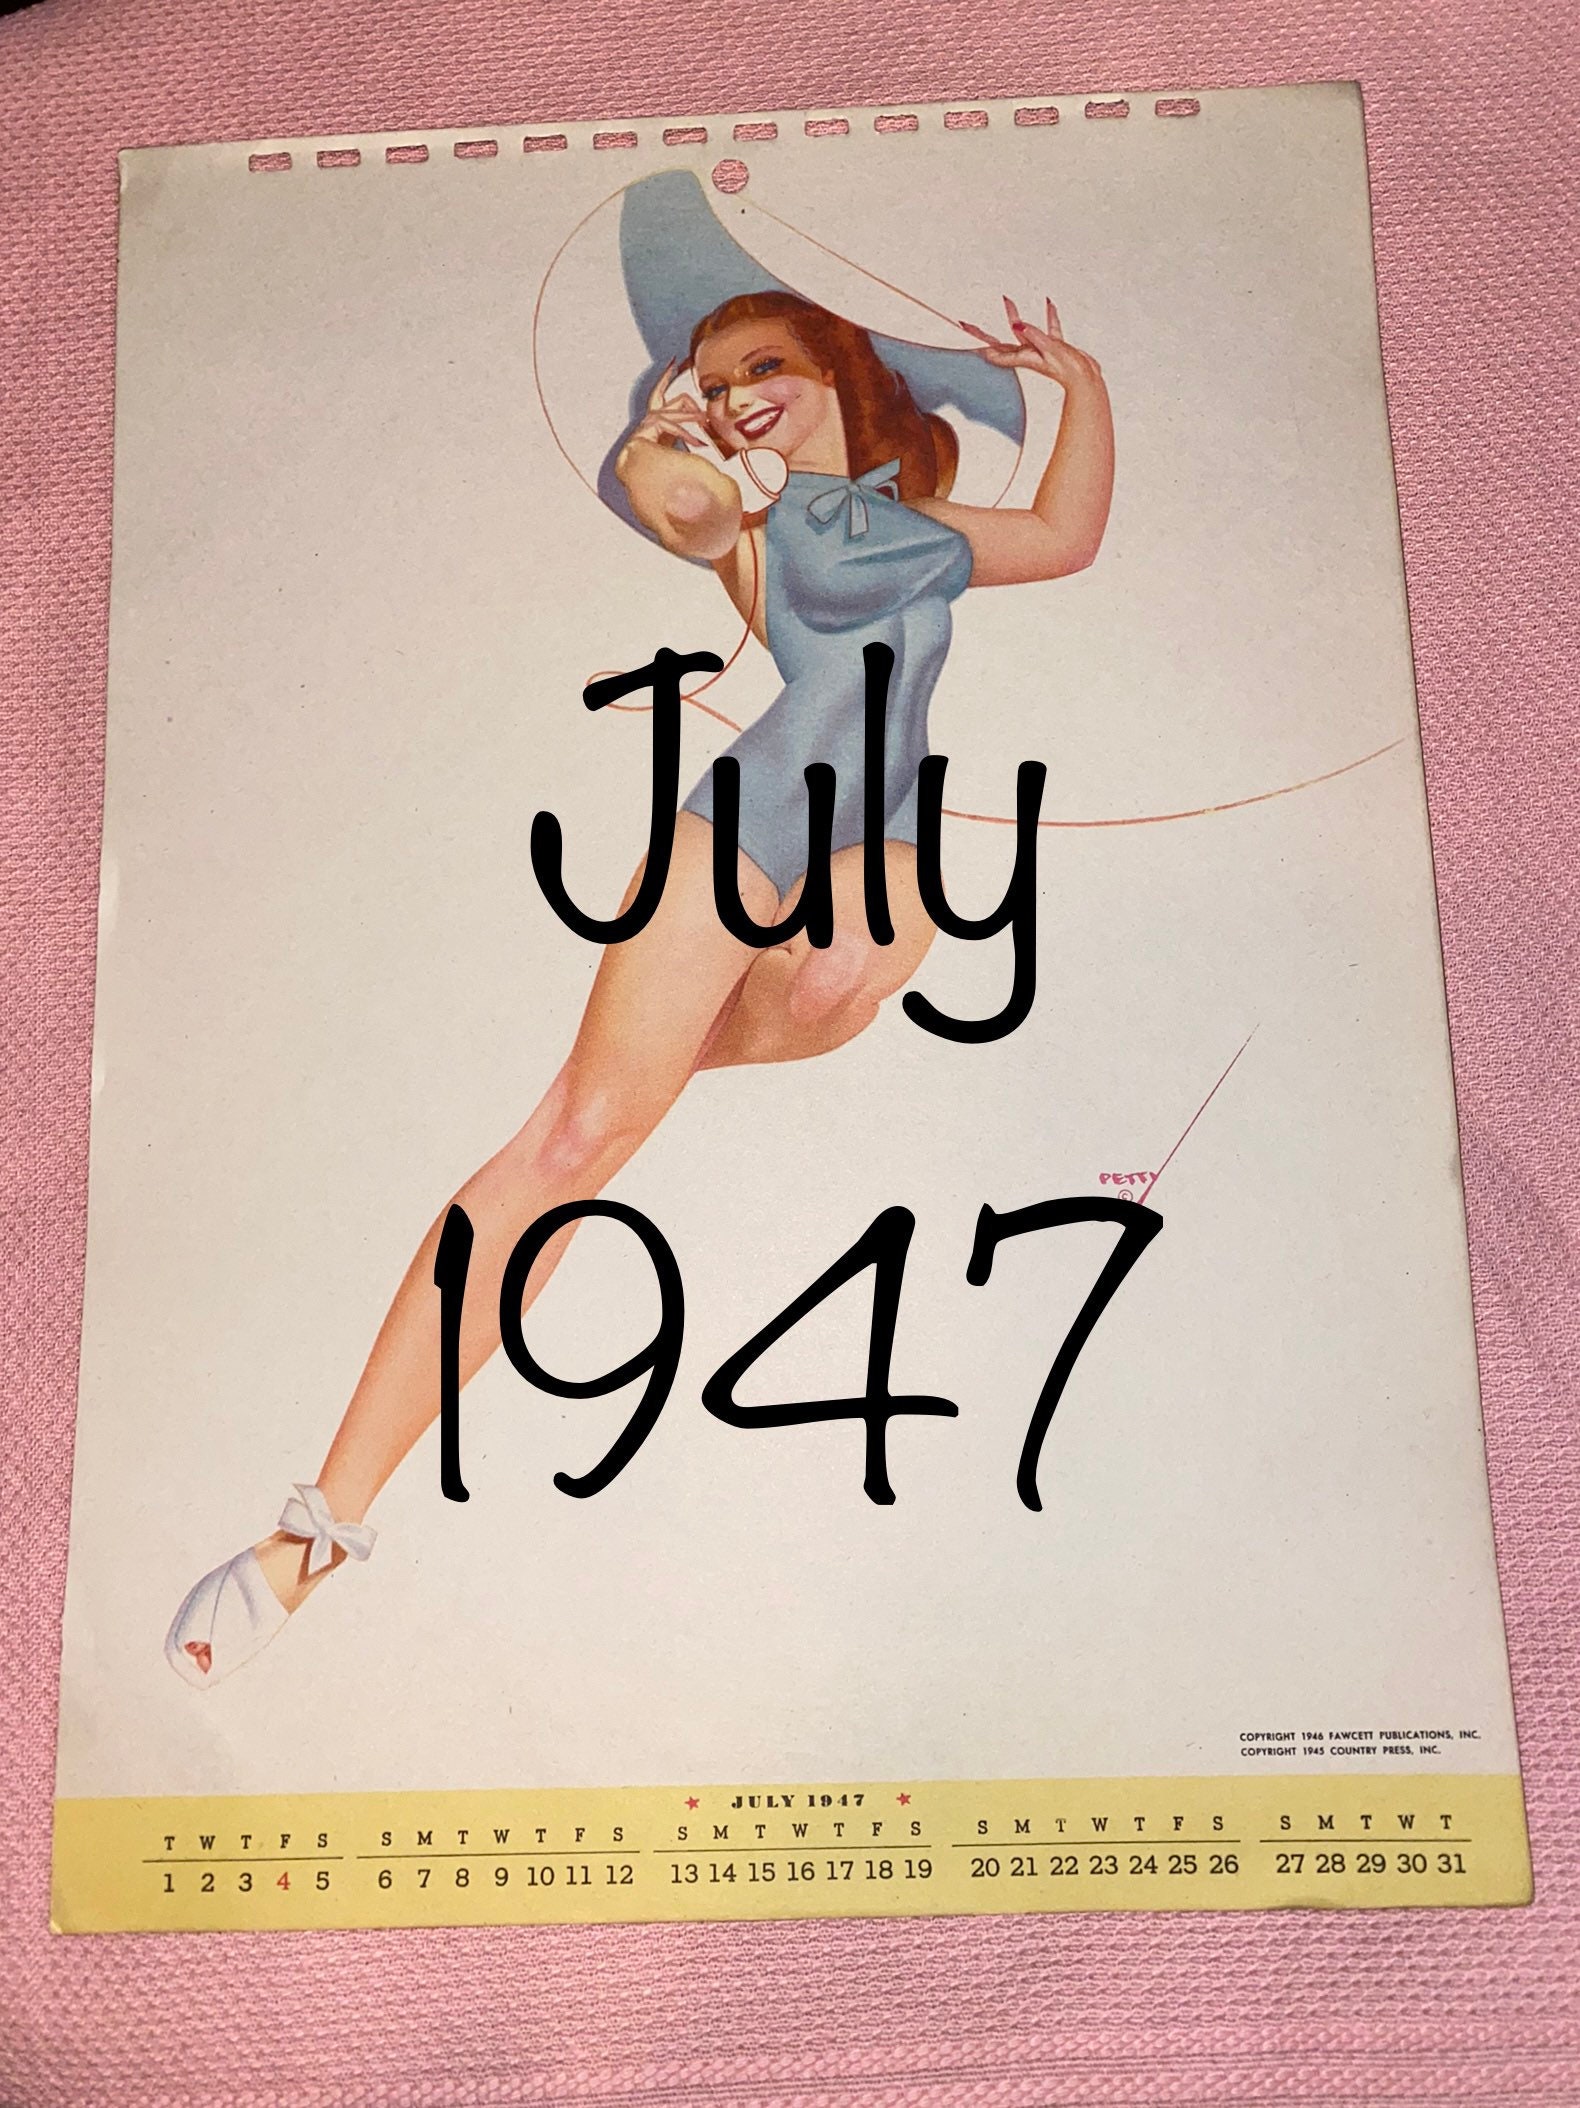 page calendrier pin-up americaine authentique Vargas octobre 1947